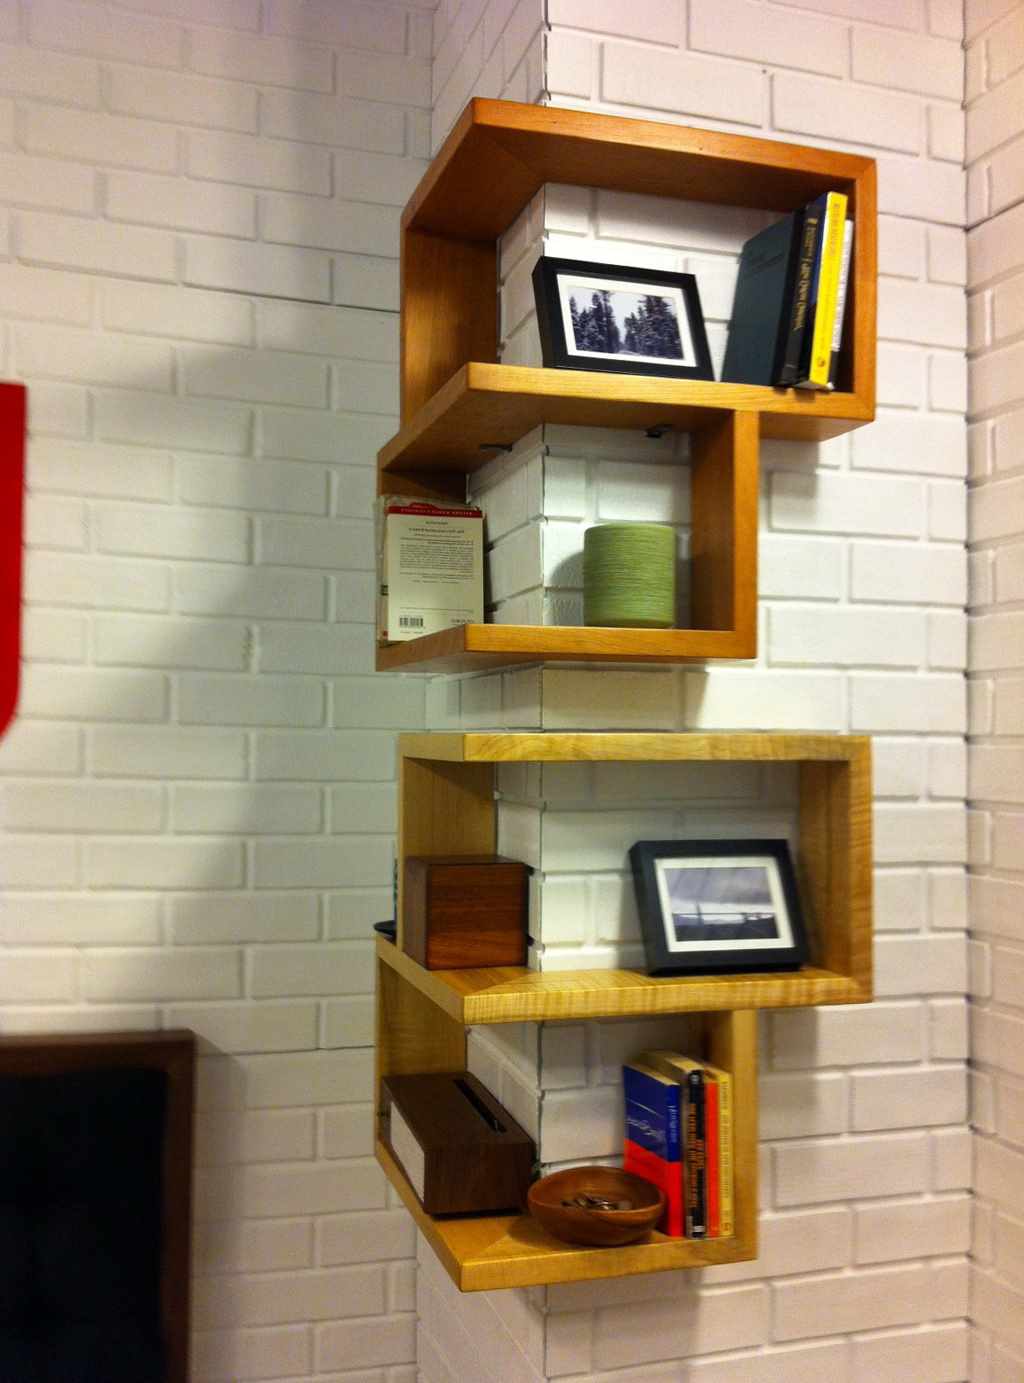 variant of a bright interior of shelves